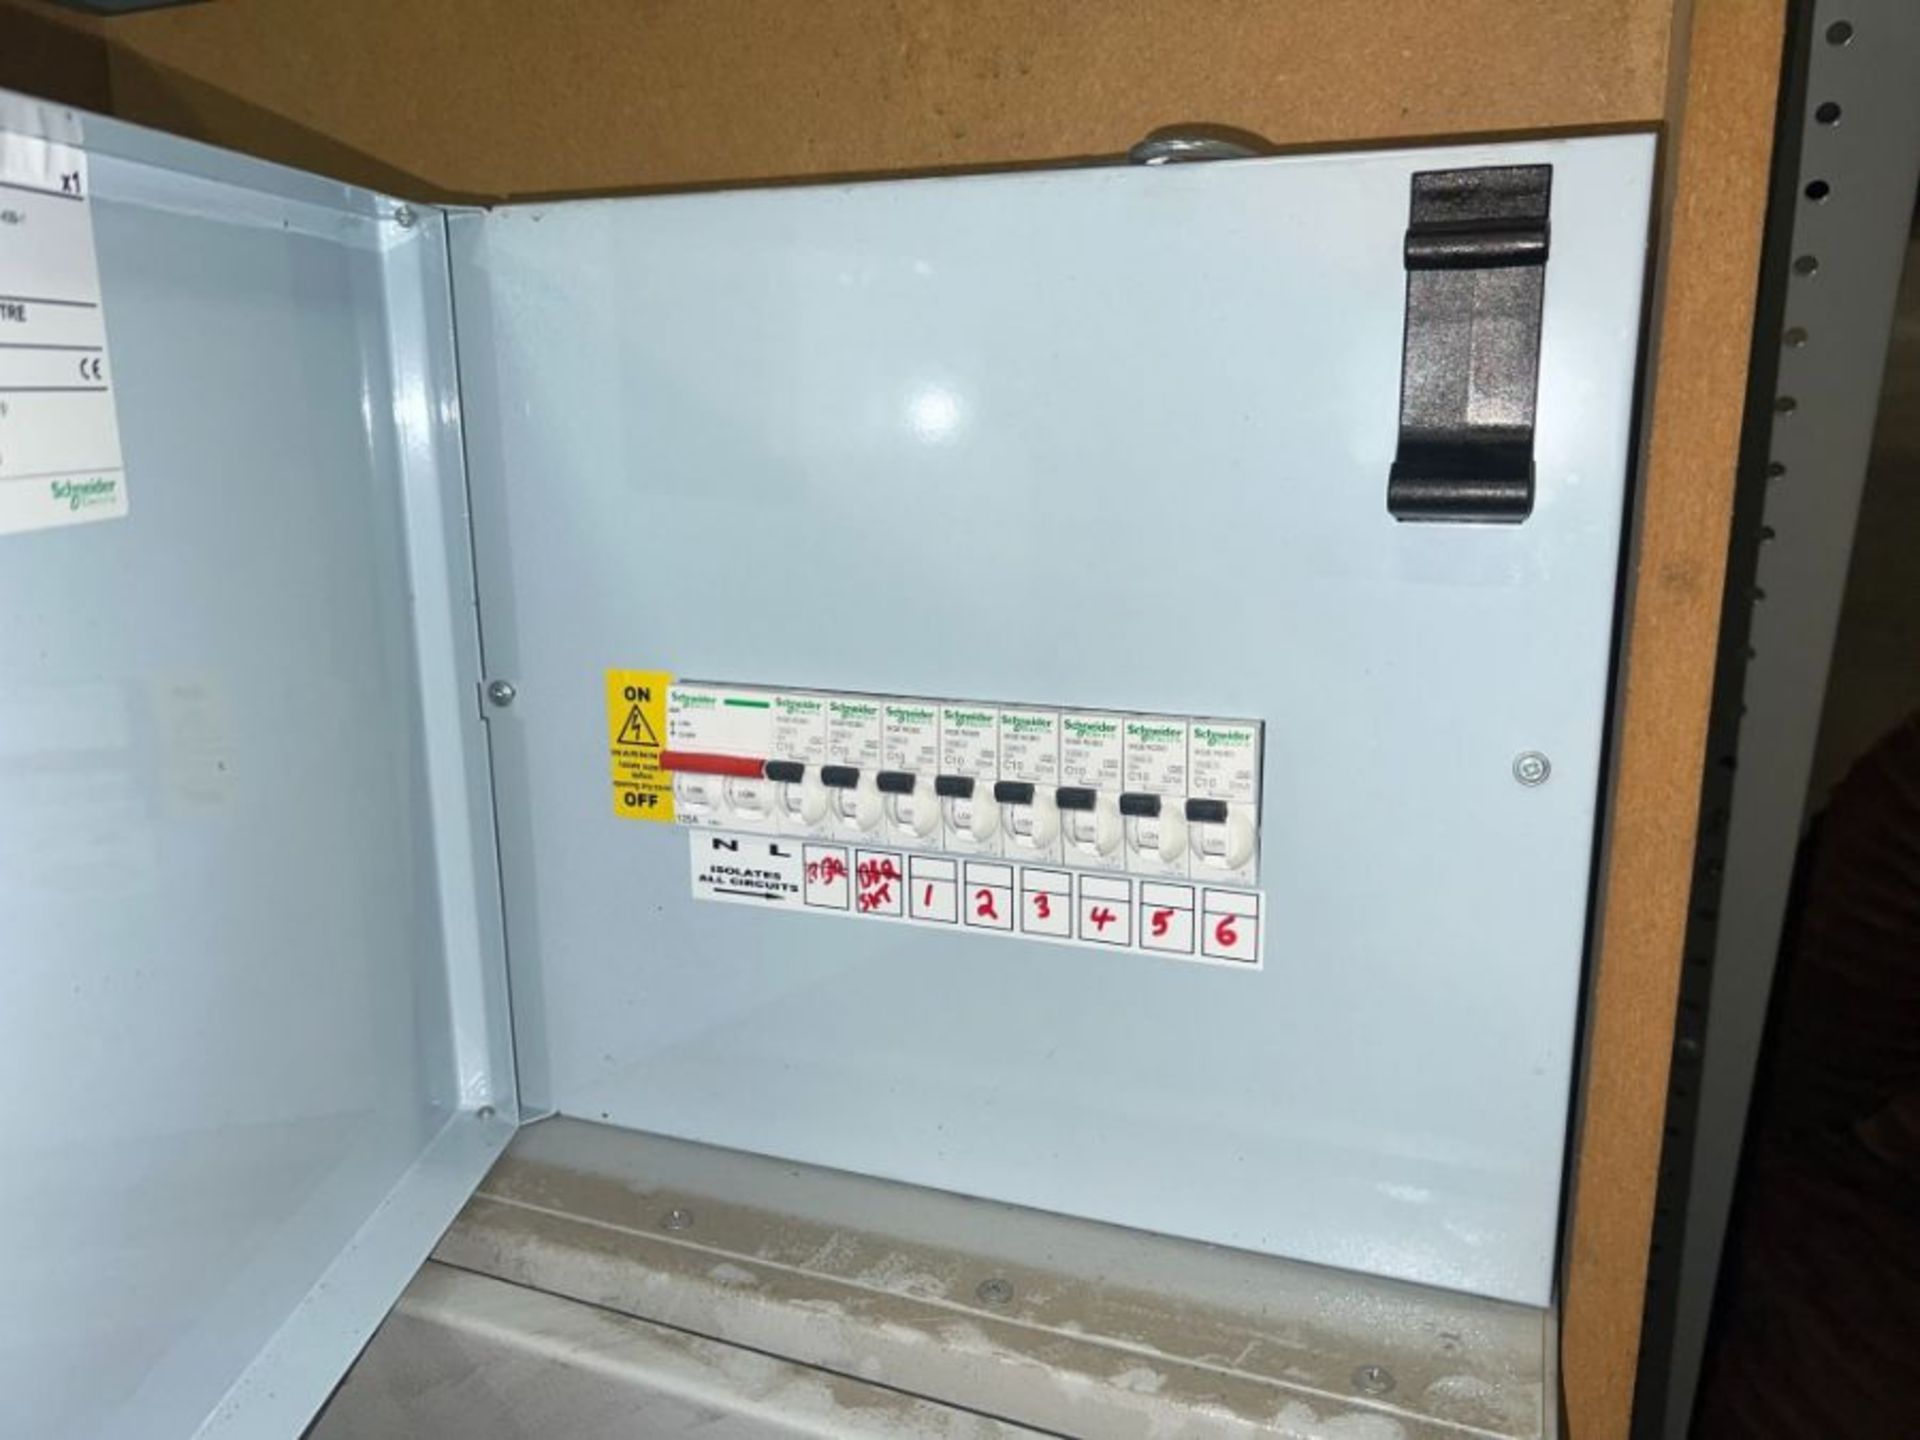 SCHNEIDER KQ LOADCENTRE MAINS SWITCH BOARD AND BLUE PLUGS POWER BOARD CABINET (ASNEW) - Image 3 of 3